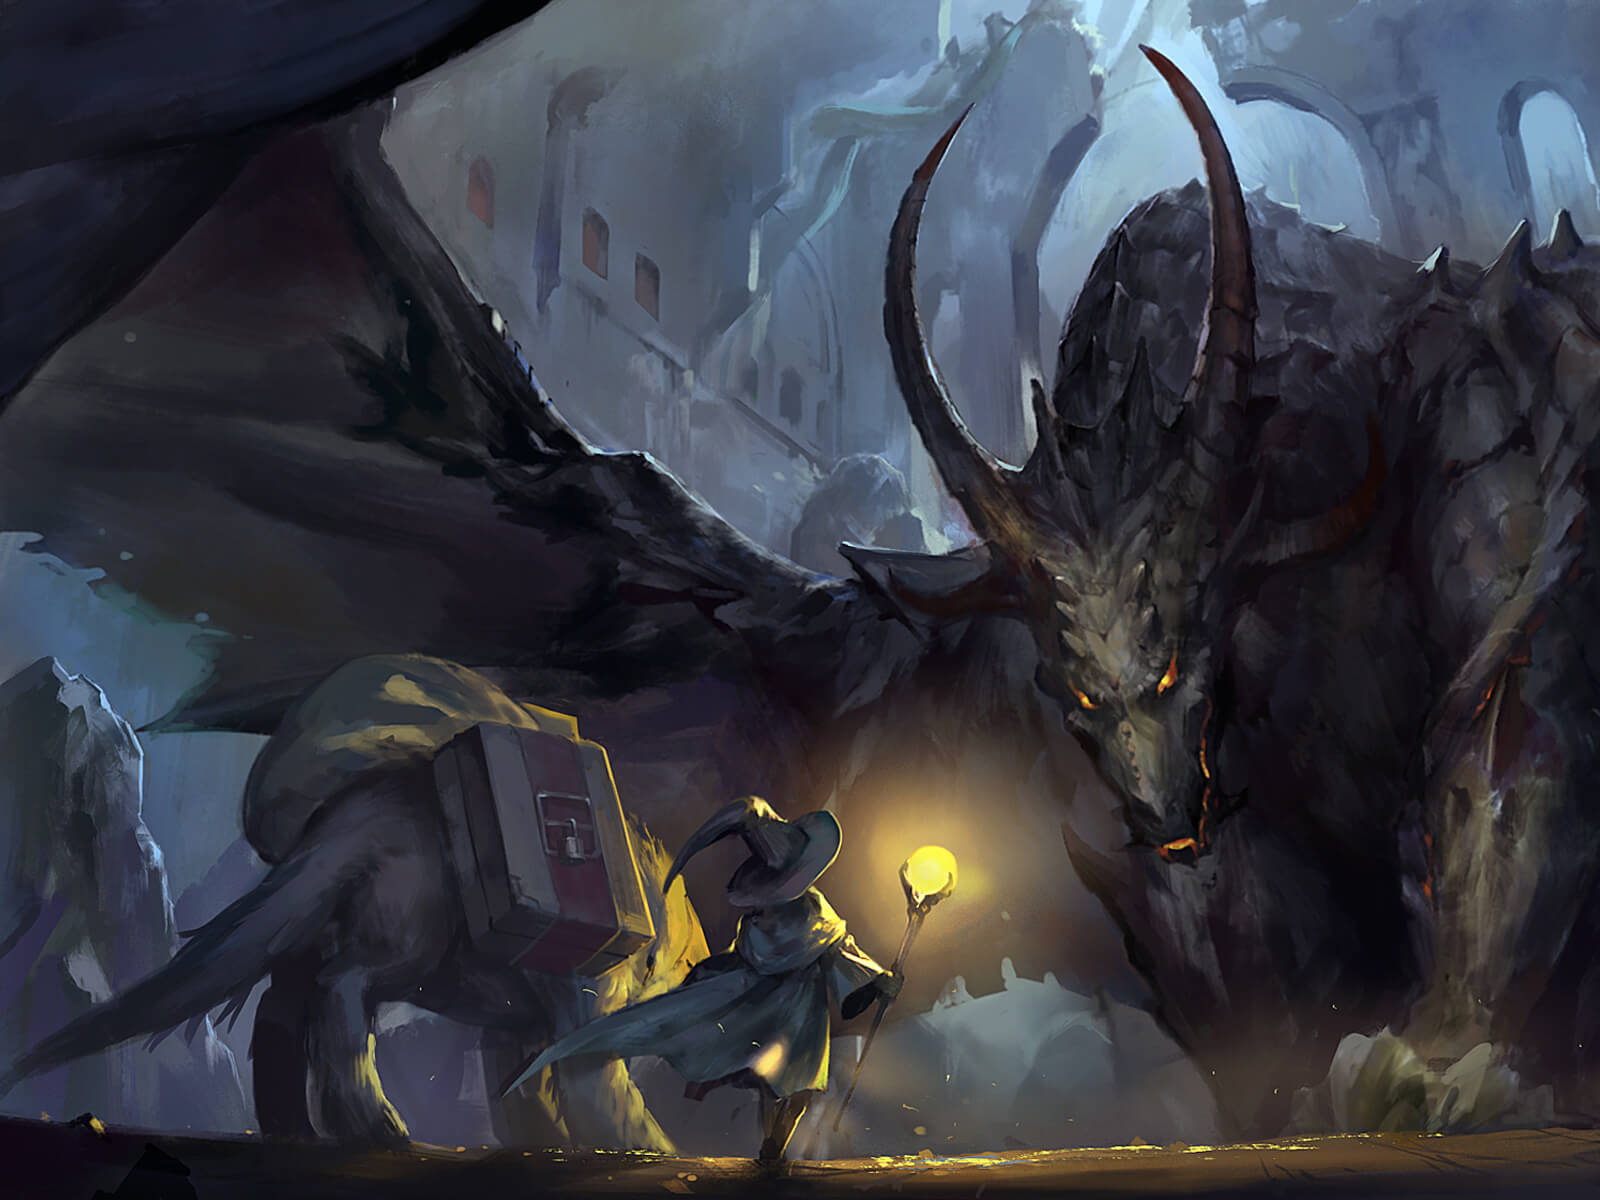 digital painting of a character in a witch hat and a dog-like creature facing an enormous, threatening dragon